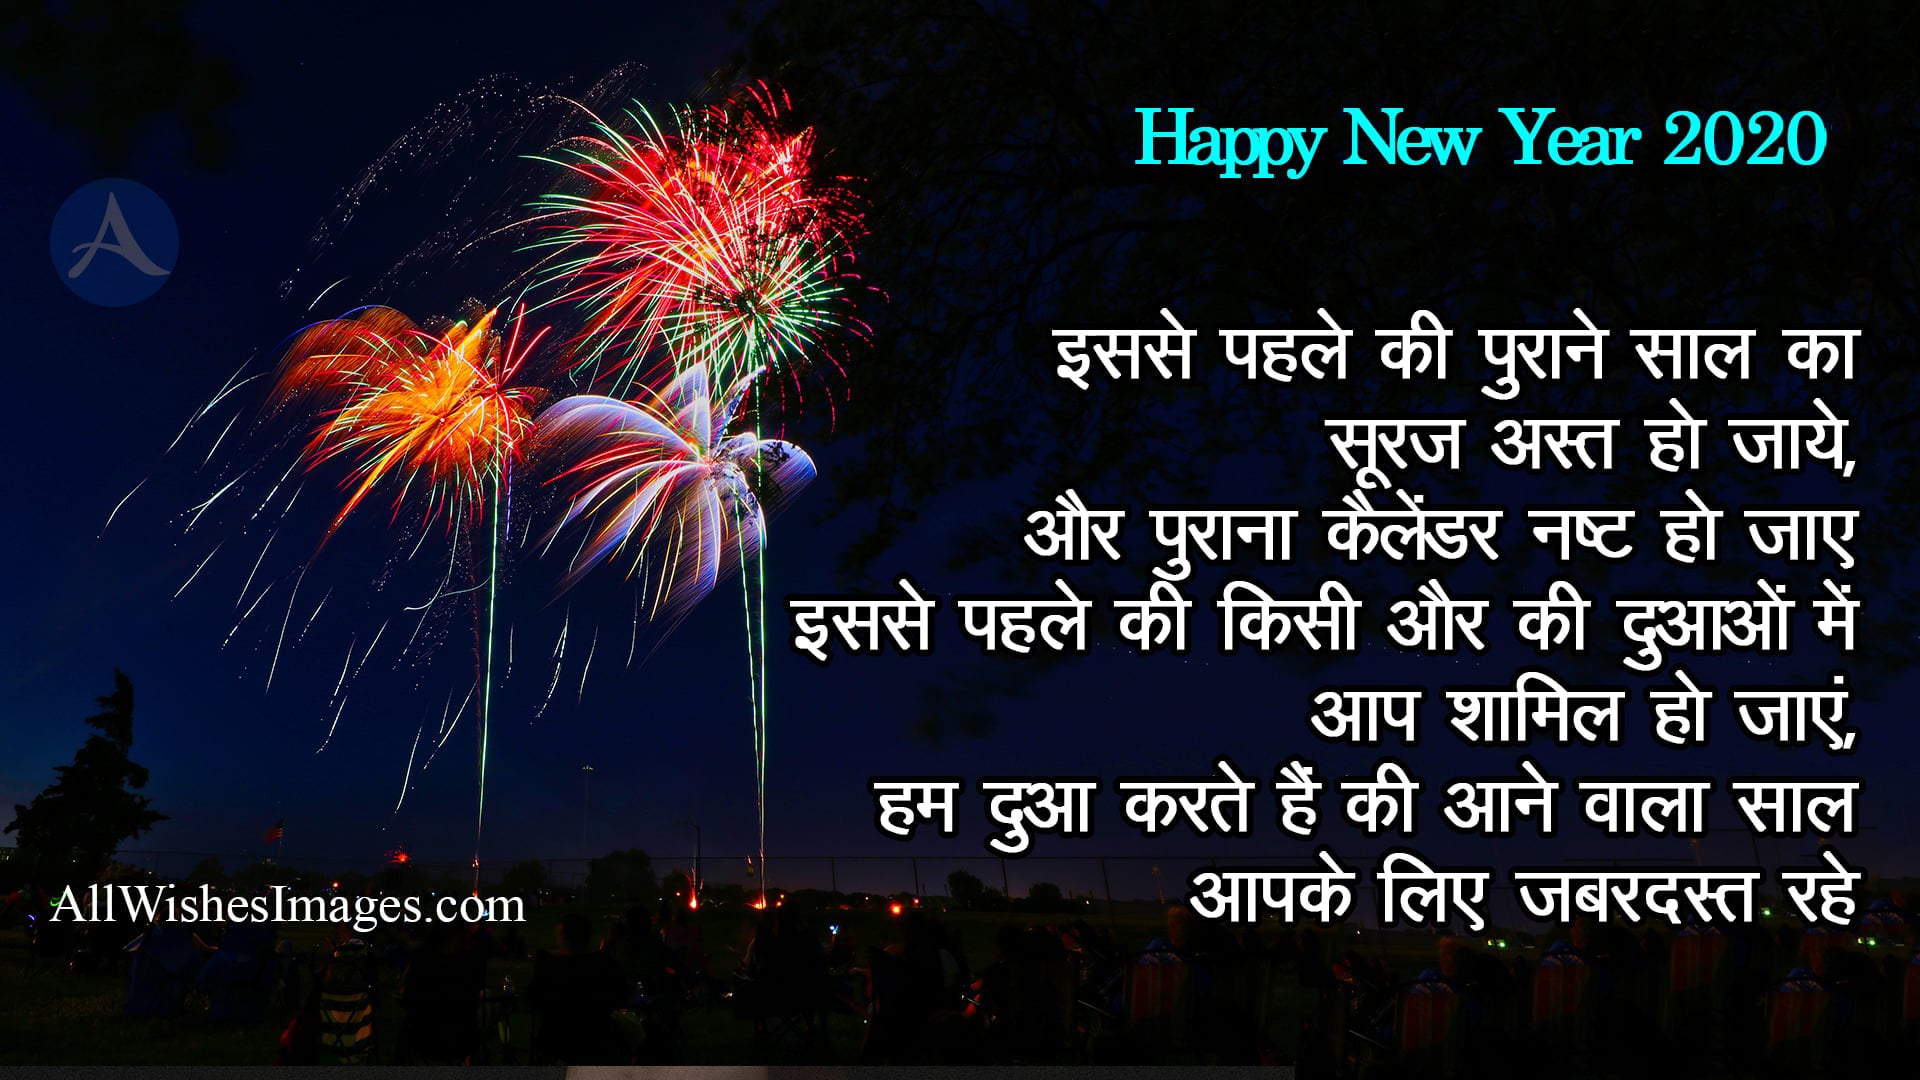 Happy New Year 2020 Images With Quotes In Hindi - All Wishes Images -  Images for WhatsApp